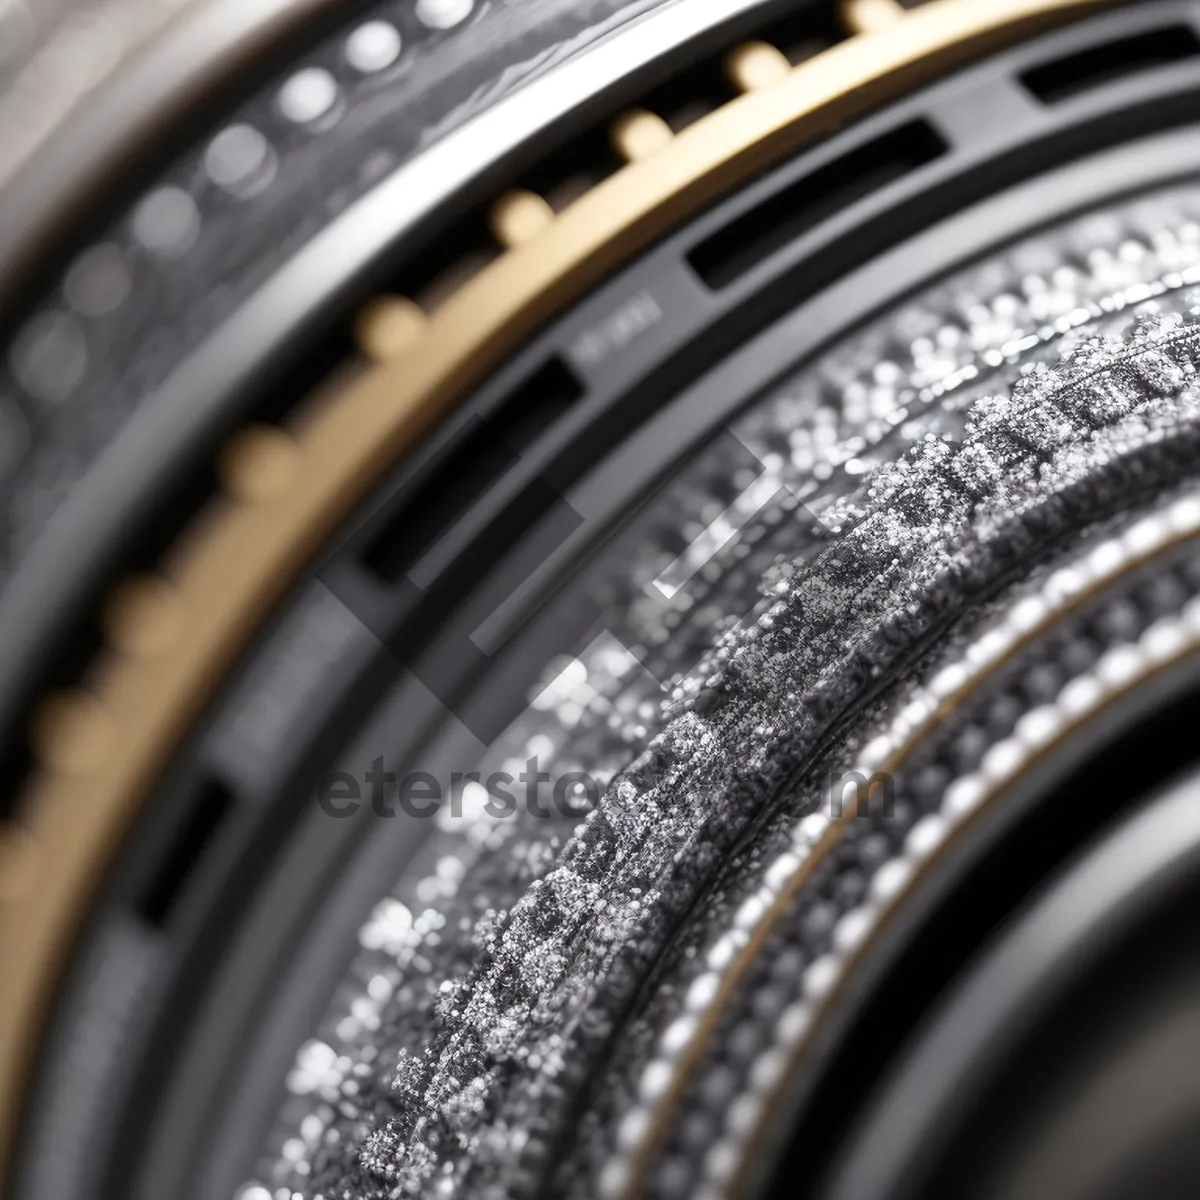 Picture of Camera Lens Shutter Mechanism - Close-Up View